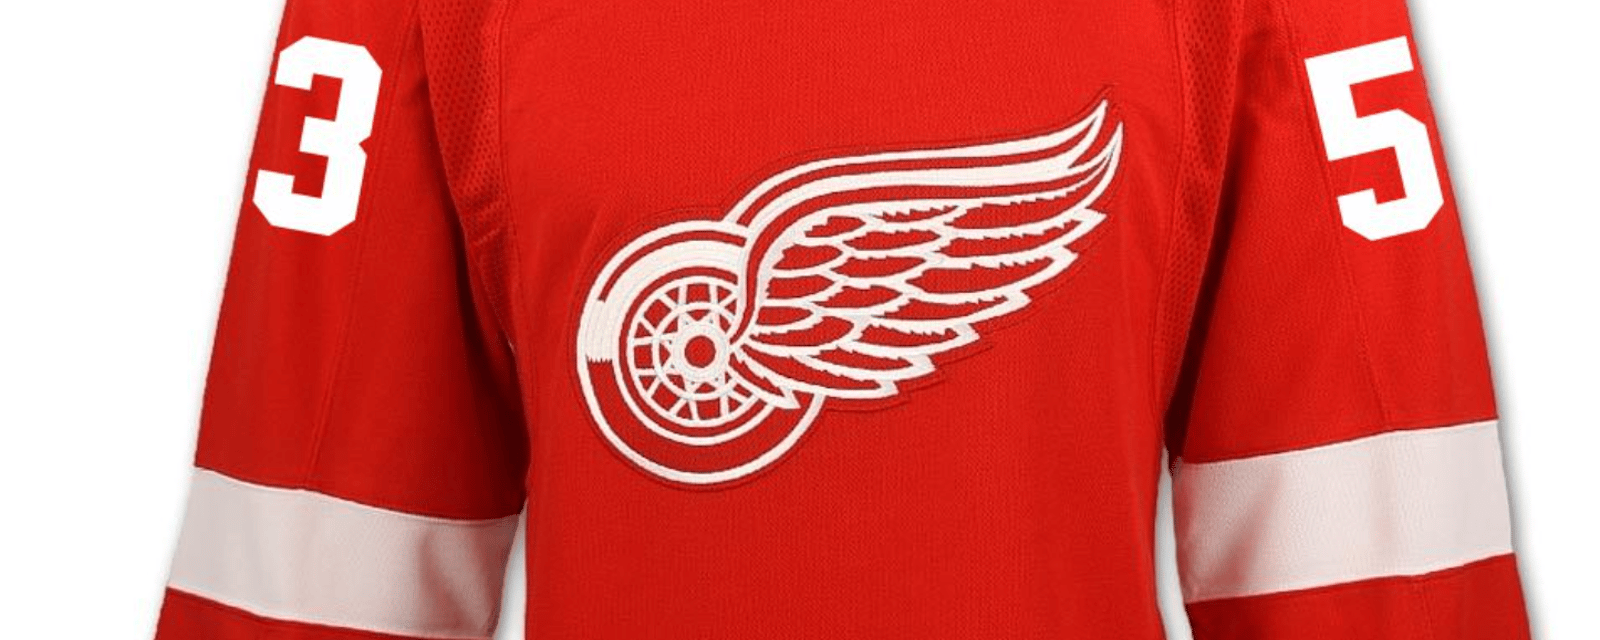 Report: Red Wings to announce controversial change to iconic jersey 